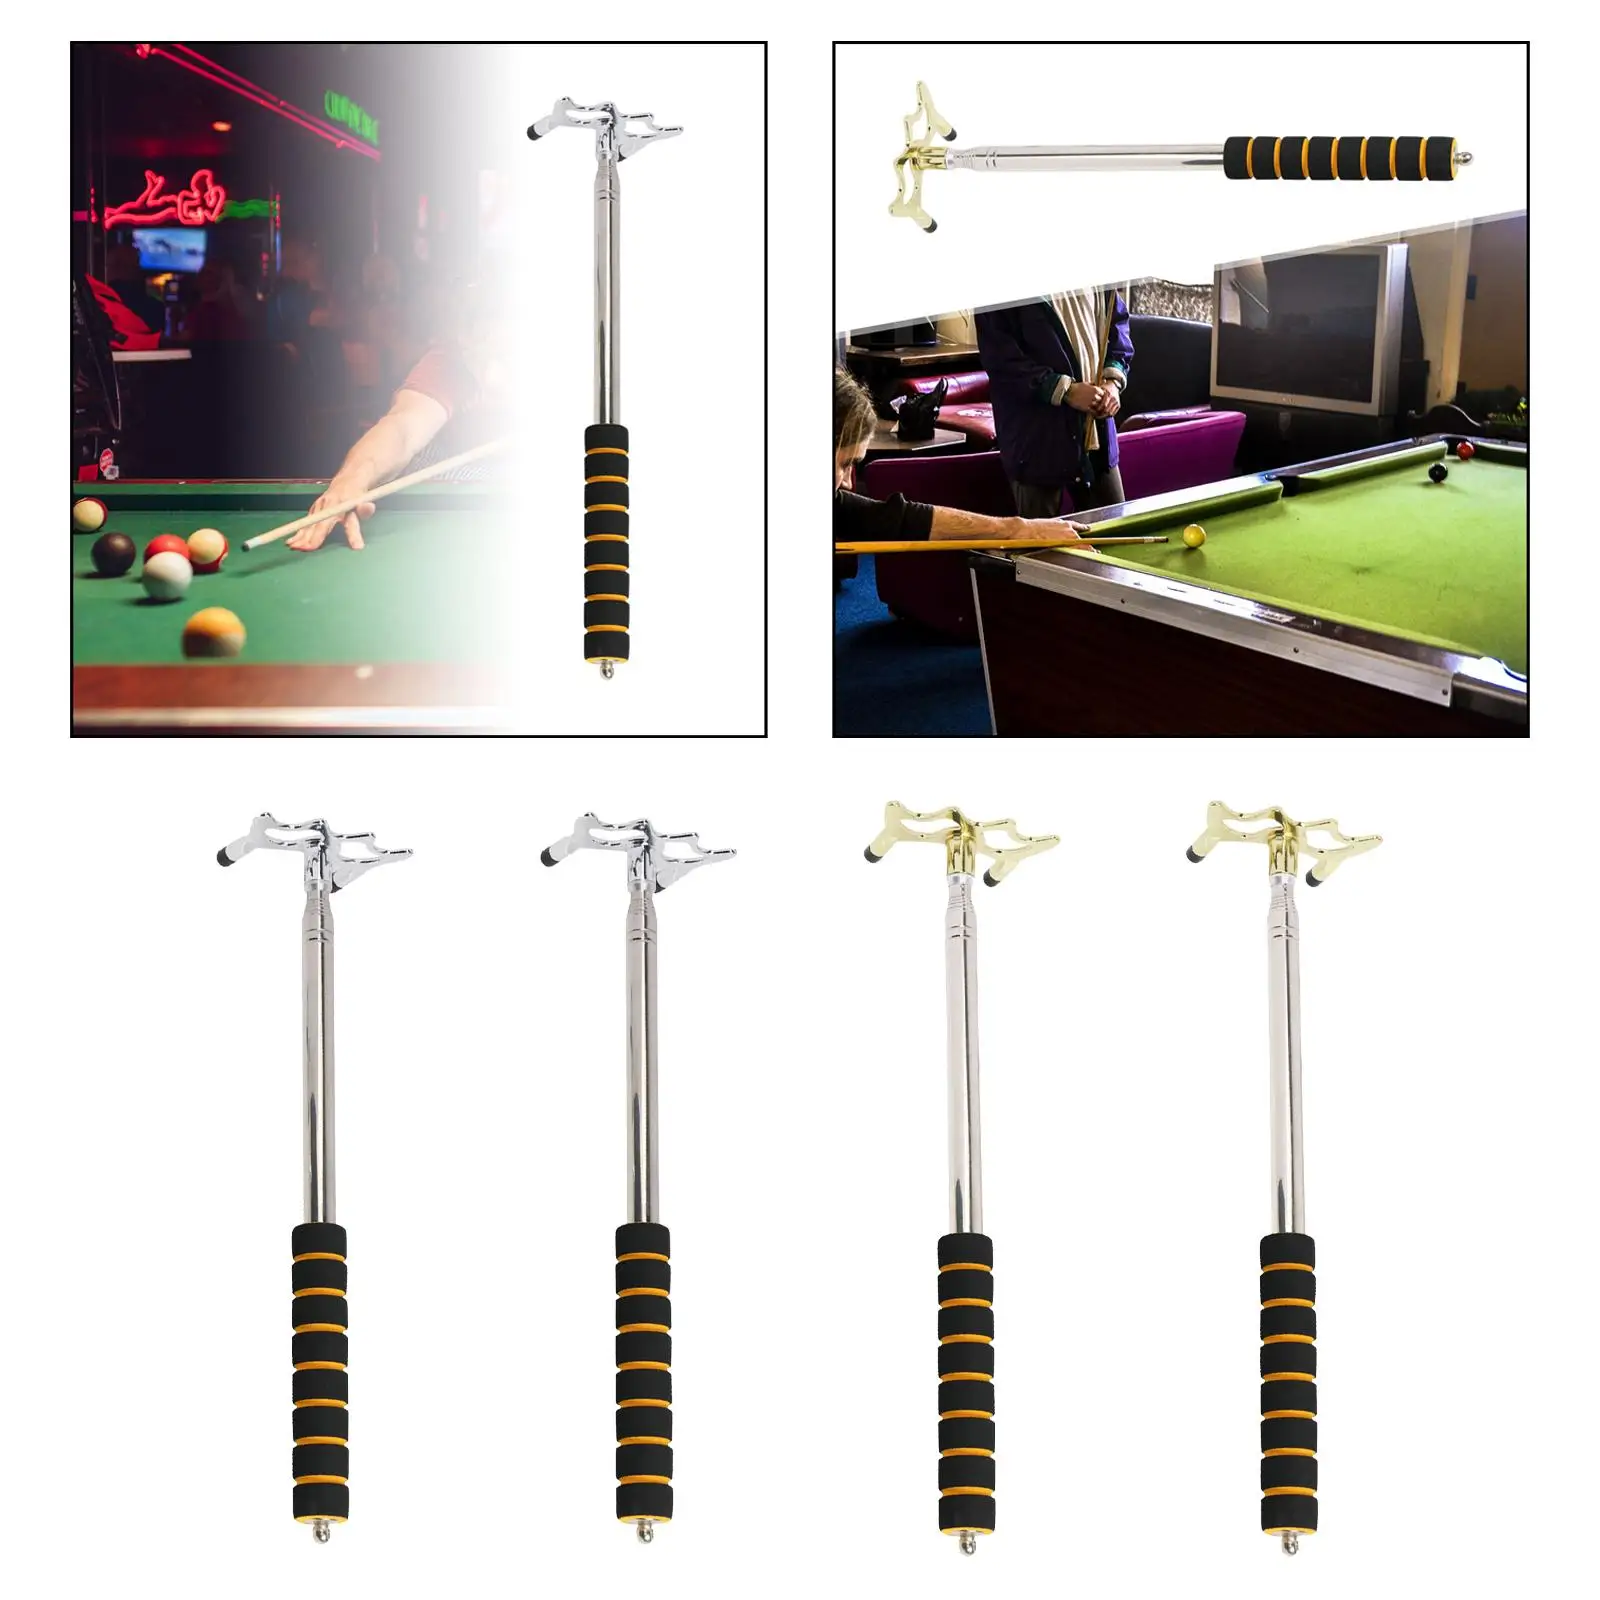 Billiards Pool Cue Stick with Removable Bridge Head for Game Club Pool Table